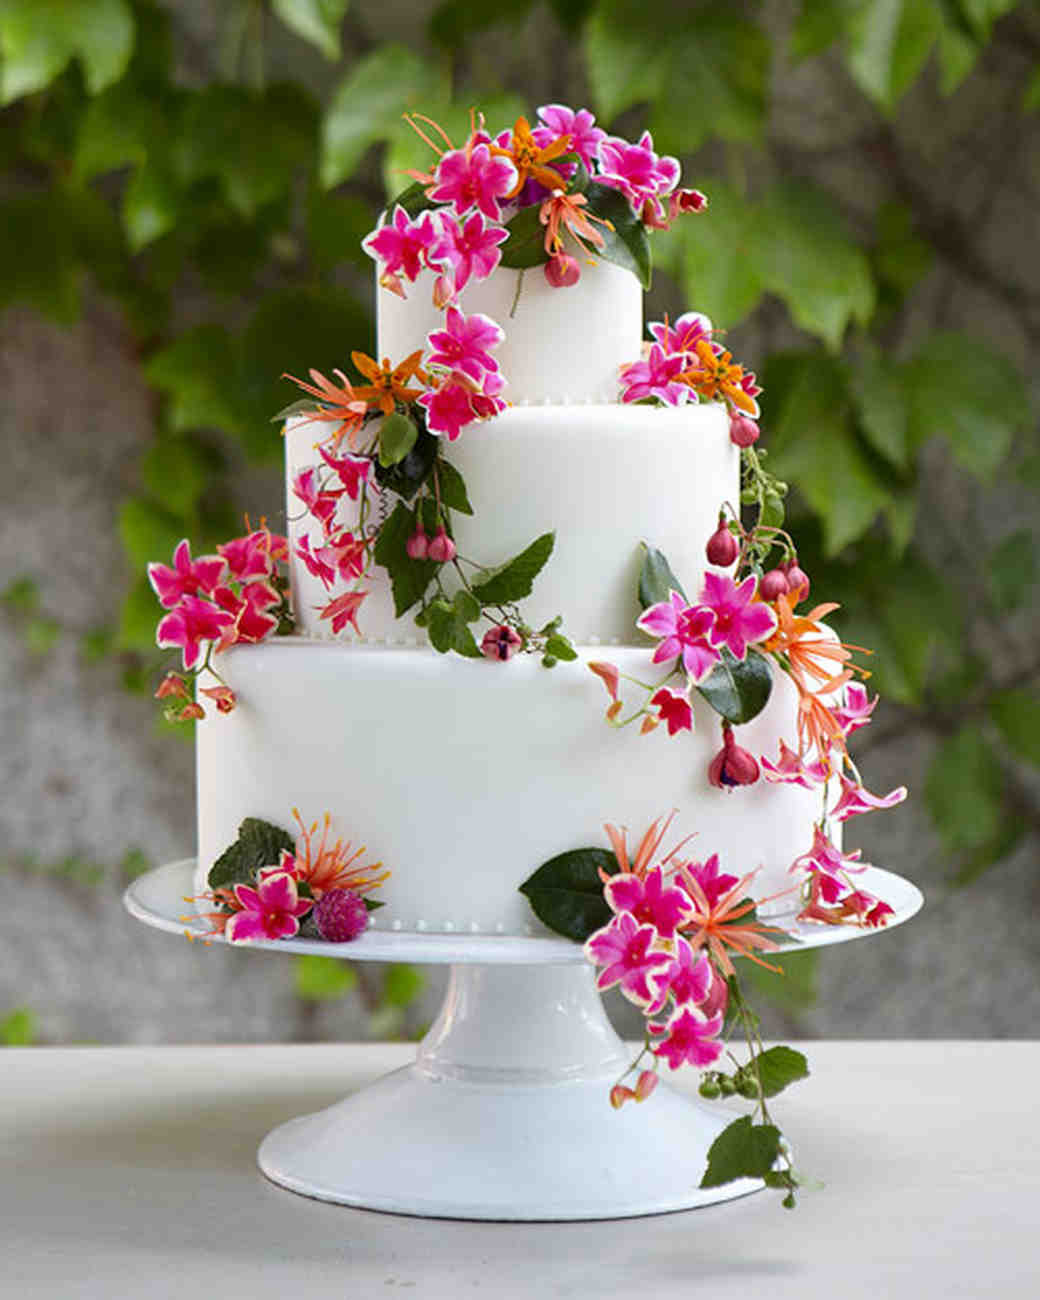 Wedding Cakes With Fresh Flowers Tips
 Flowers for Every Element of Your Wedding